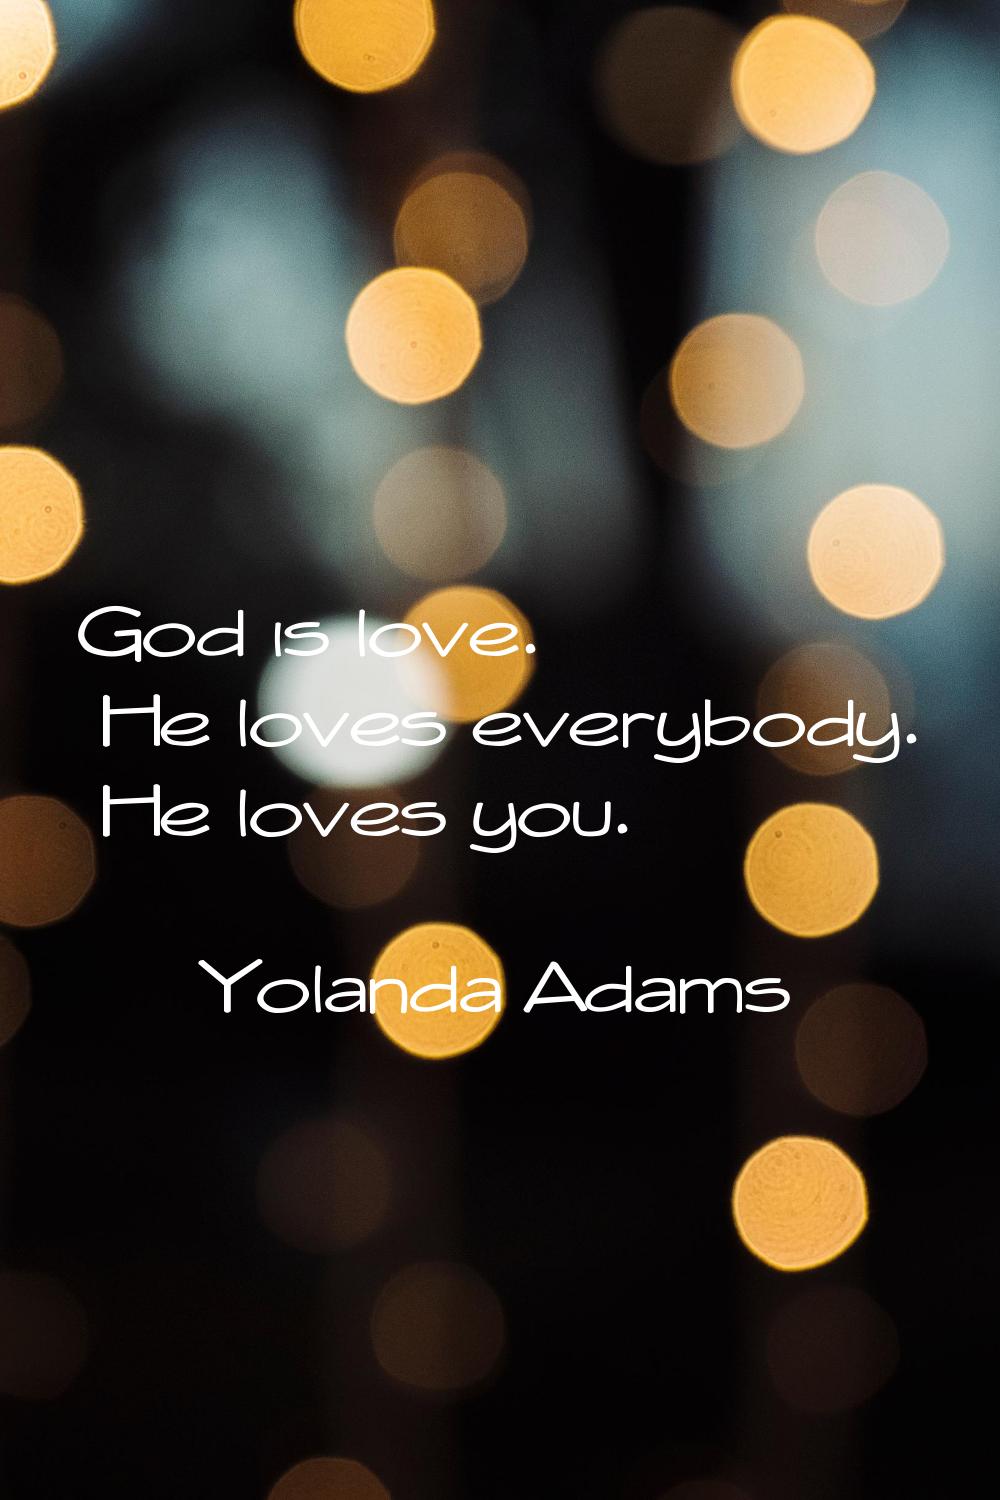 God is love. He loves everybody. He loves you.